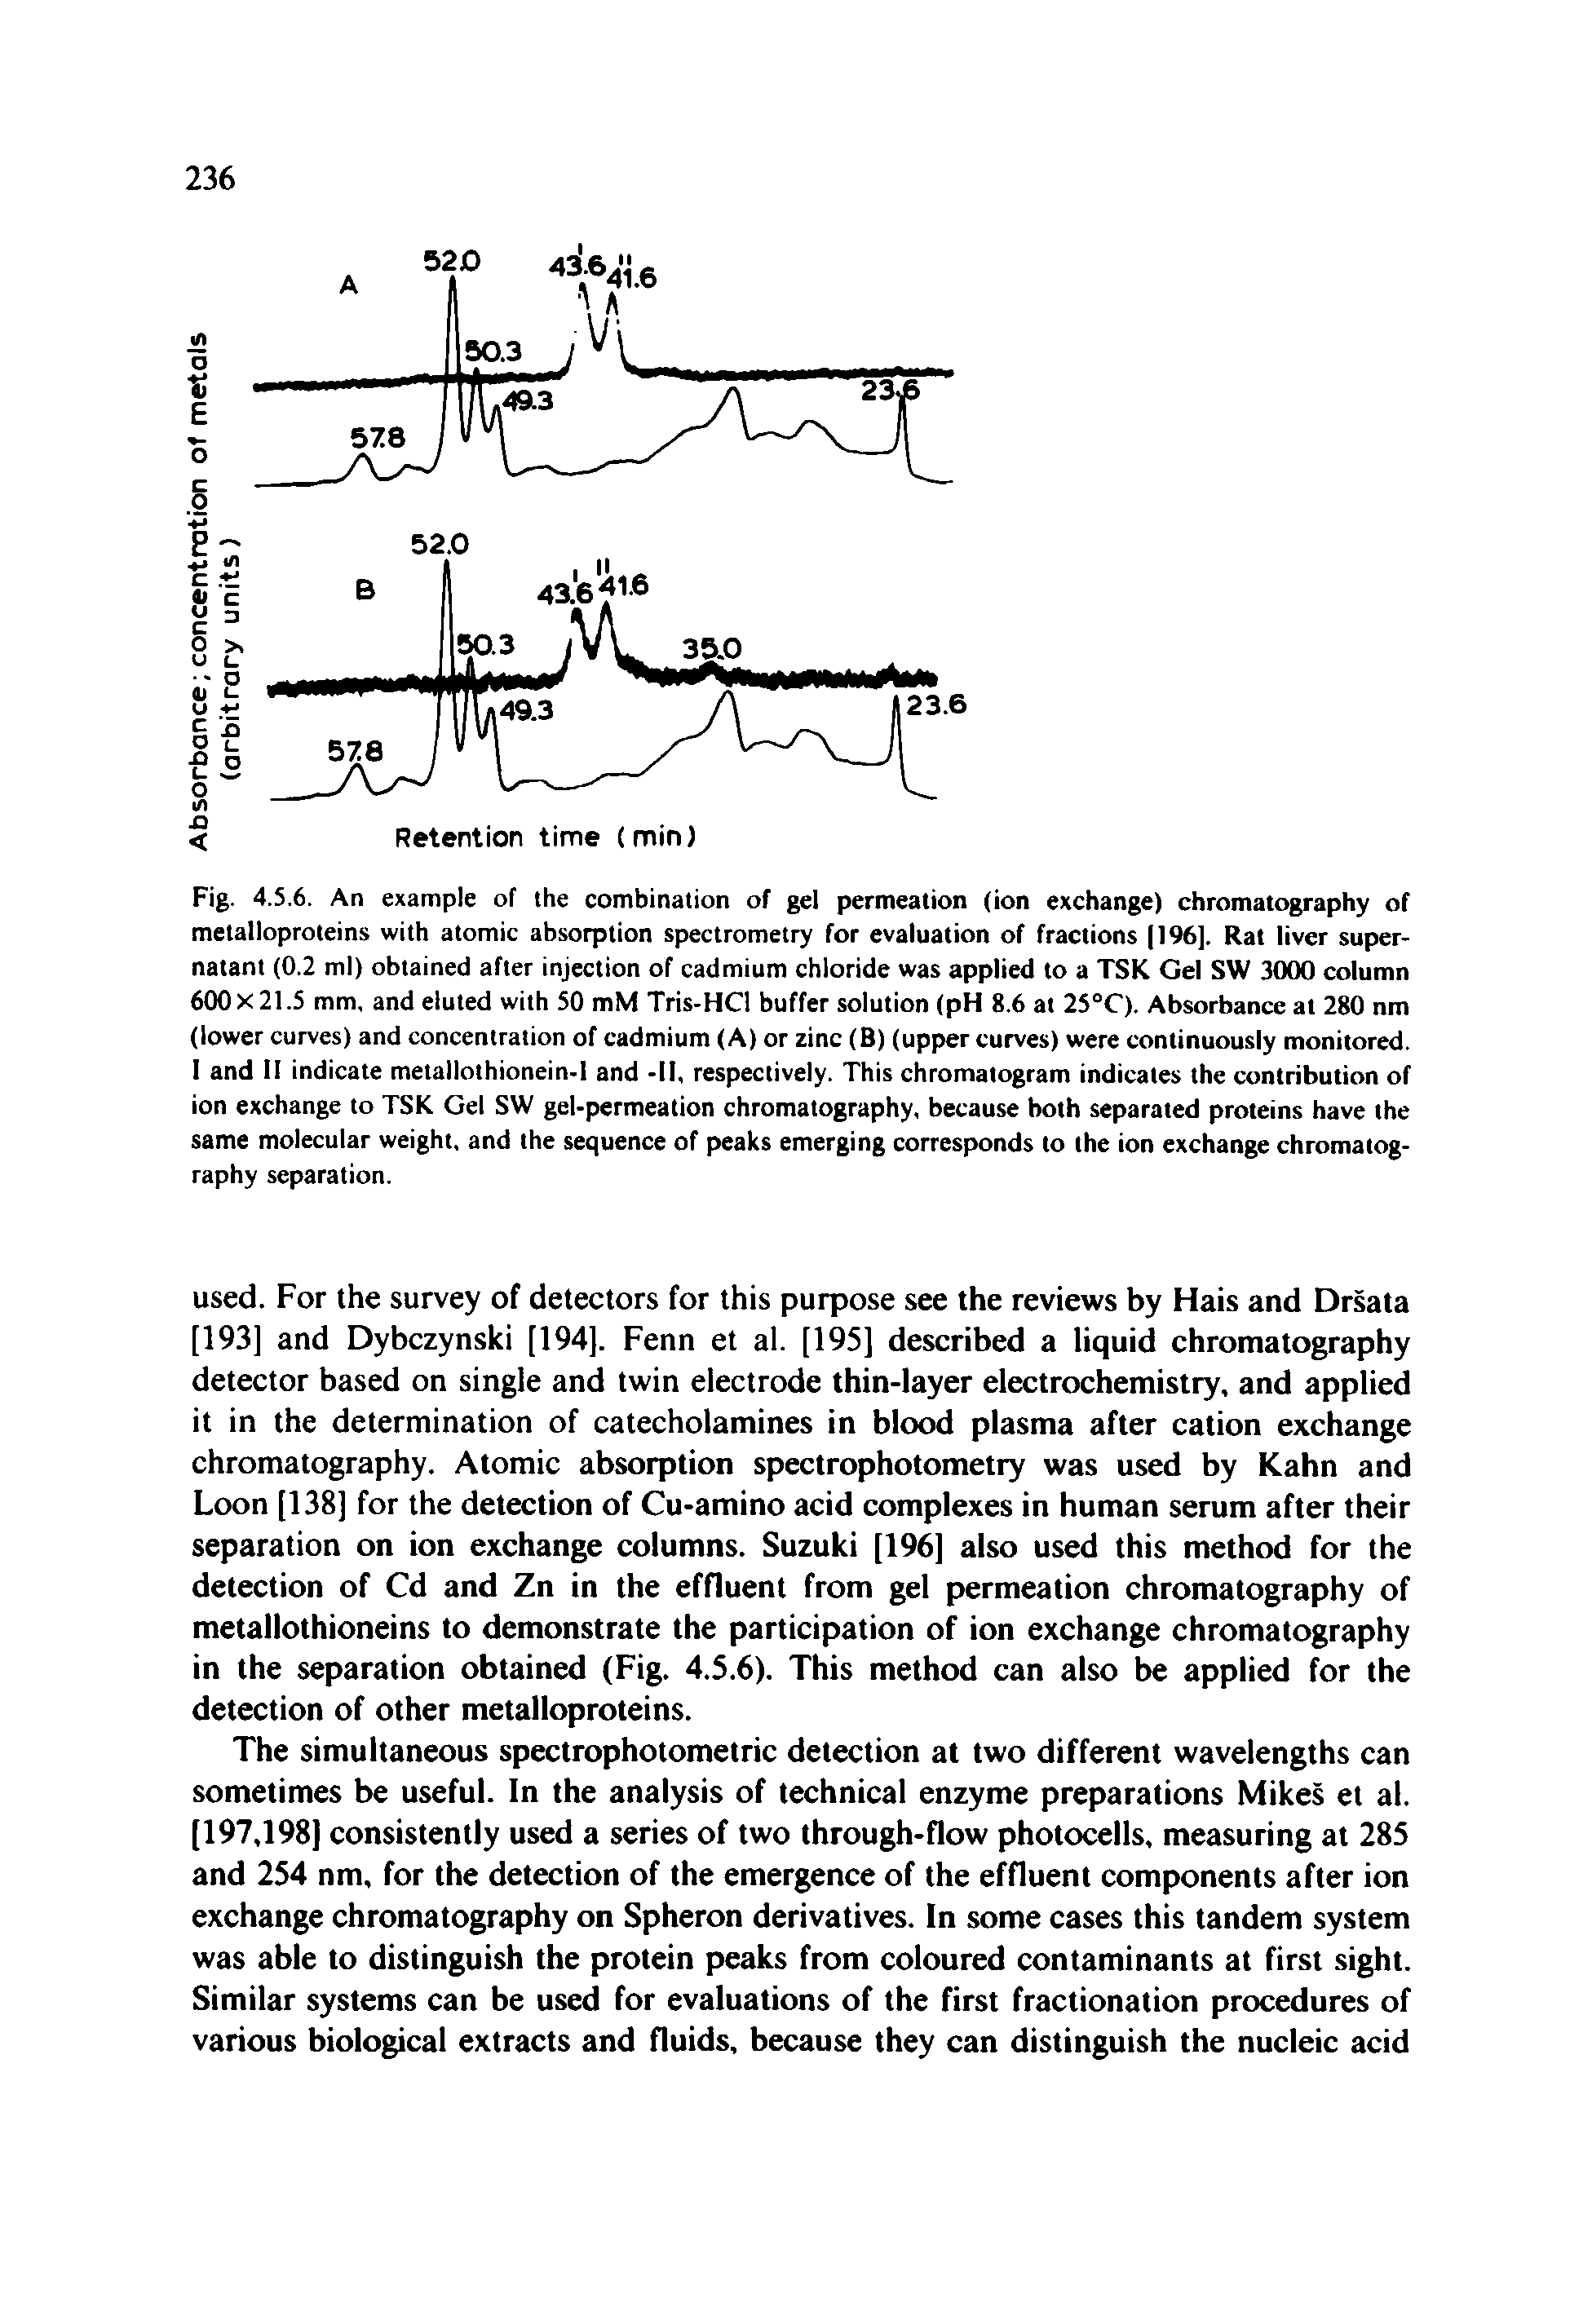 Fig. 4.5.6. An example of the combination of gel permeation (ion exchange) chromatography of metalloproteins with atomic absorption spectrometry for evaluation of fractions I96], Rat liver supernatant (0.2 ml) obtained after injection of cadmium chloride was applied to a TSK Gel SW 3000 column 600x21.5 mm, and eluted with 50 mM Tris-HCl buffer solution (pH 8.6 at 25°C). Absorbance at 280 nm (lower curves) and concentration of cadmium (A) or zinc (B) (upper curves) were continuously monitored. I and II indicate metallothionein-l and -II, respectively. This chromatogram indicates the contribution of ion exchange to TSK Gel SW gel-permeation chromatography, because both separated proteins have the same molecular weight, and the sequence of peaks emerging corresponds to the ion exchange chromatography separation.